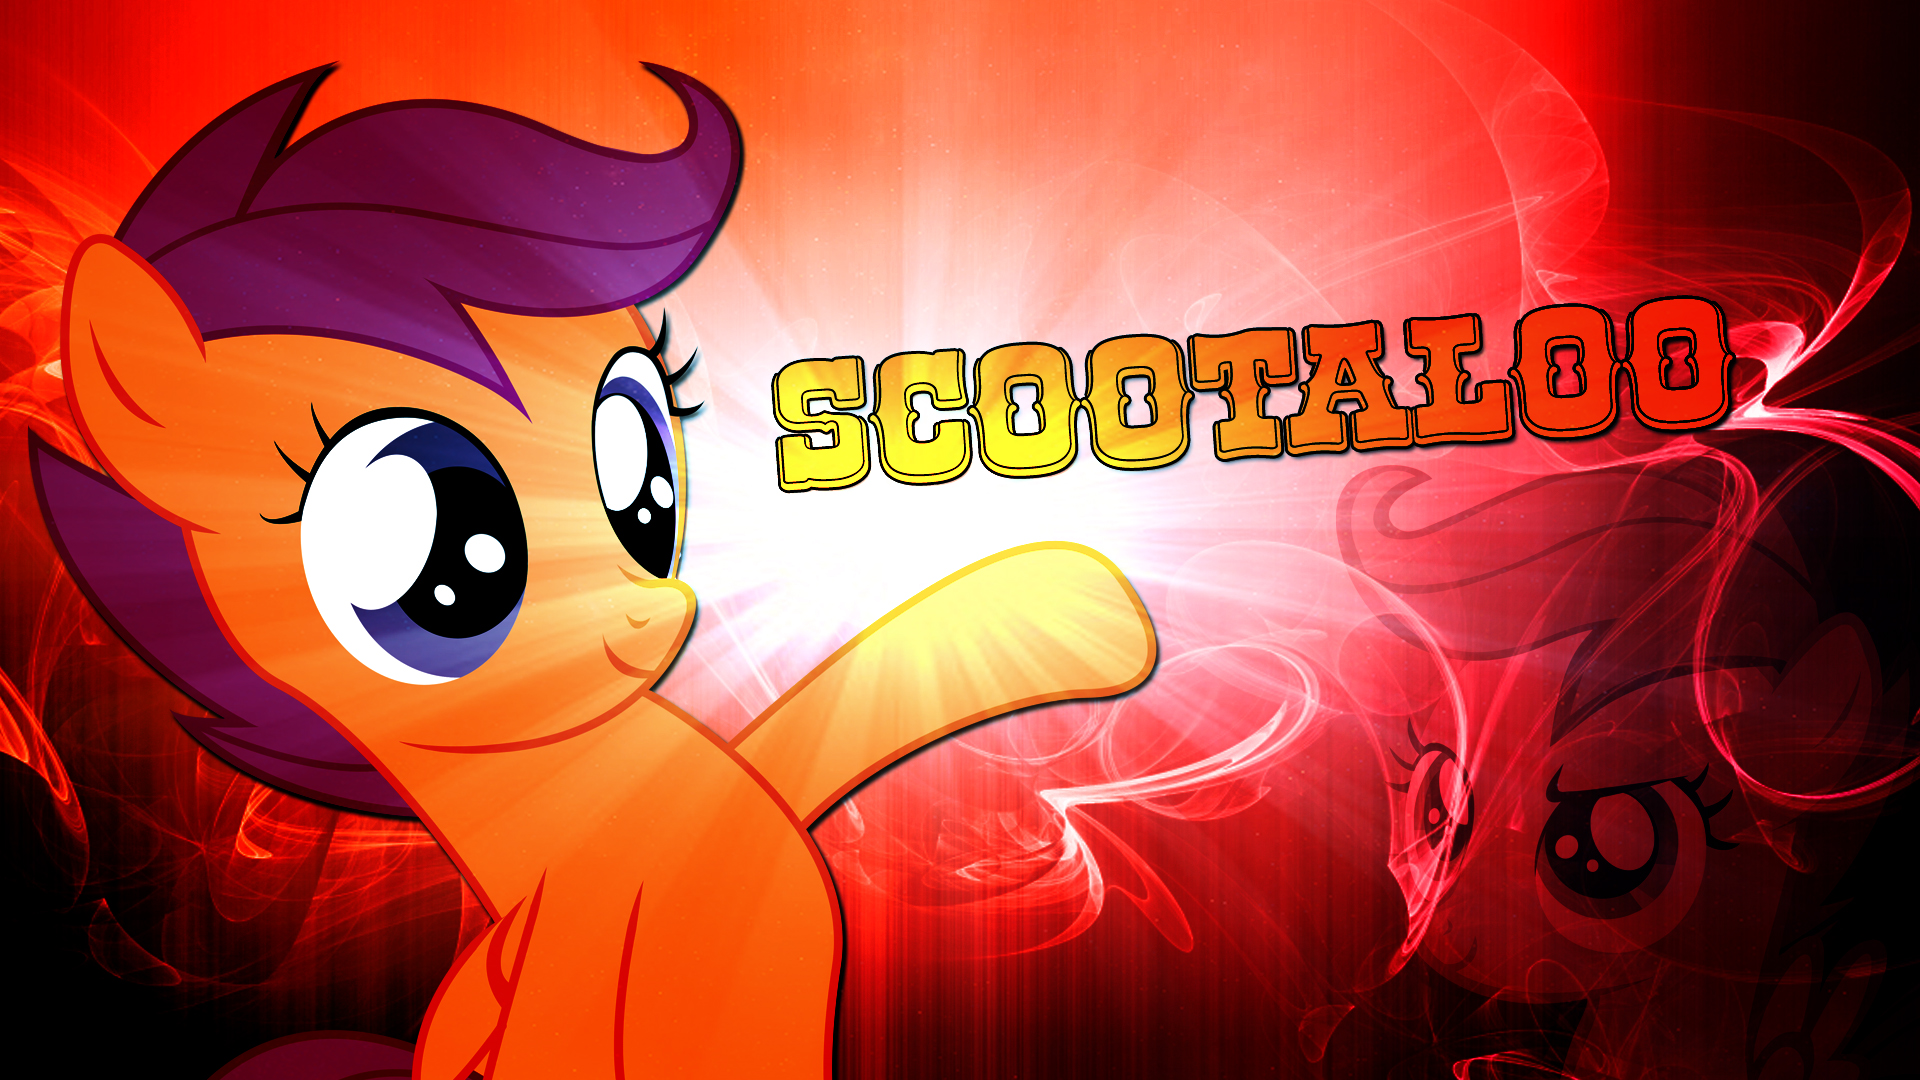 Scootaloo Wallpaper by Kooner-cz and TygerxL